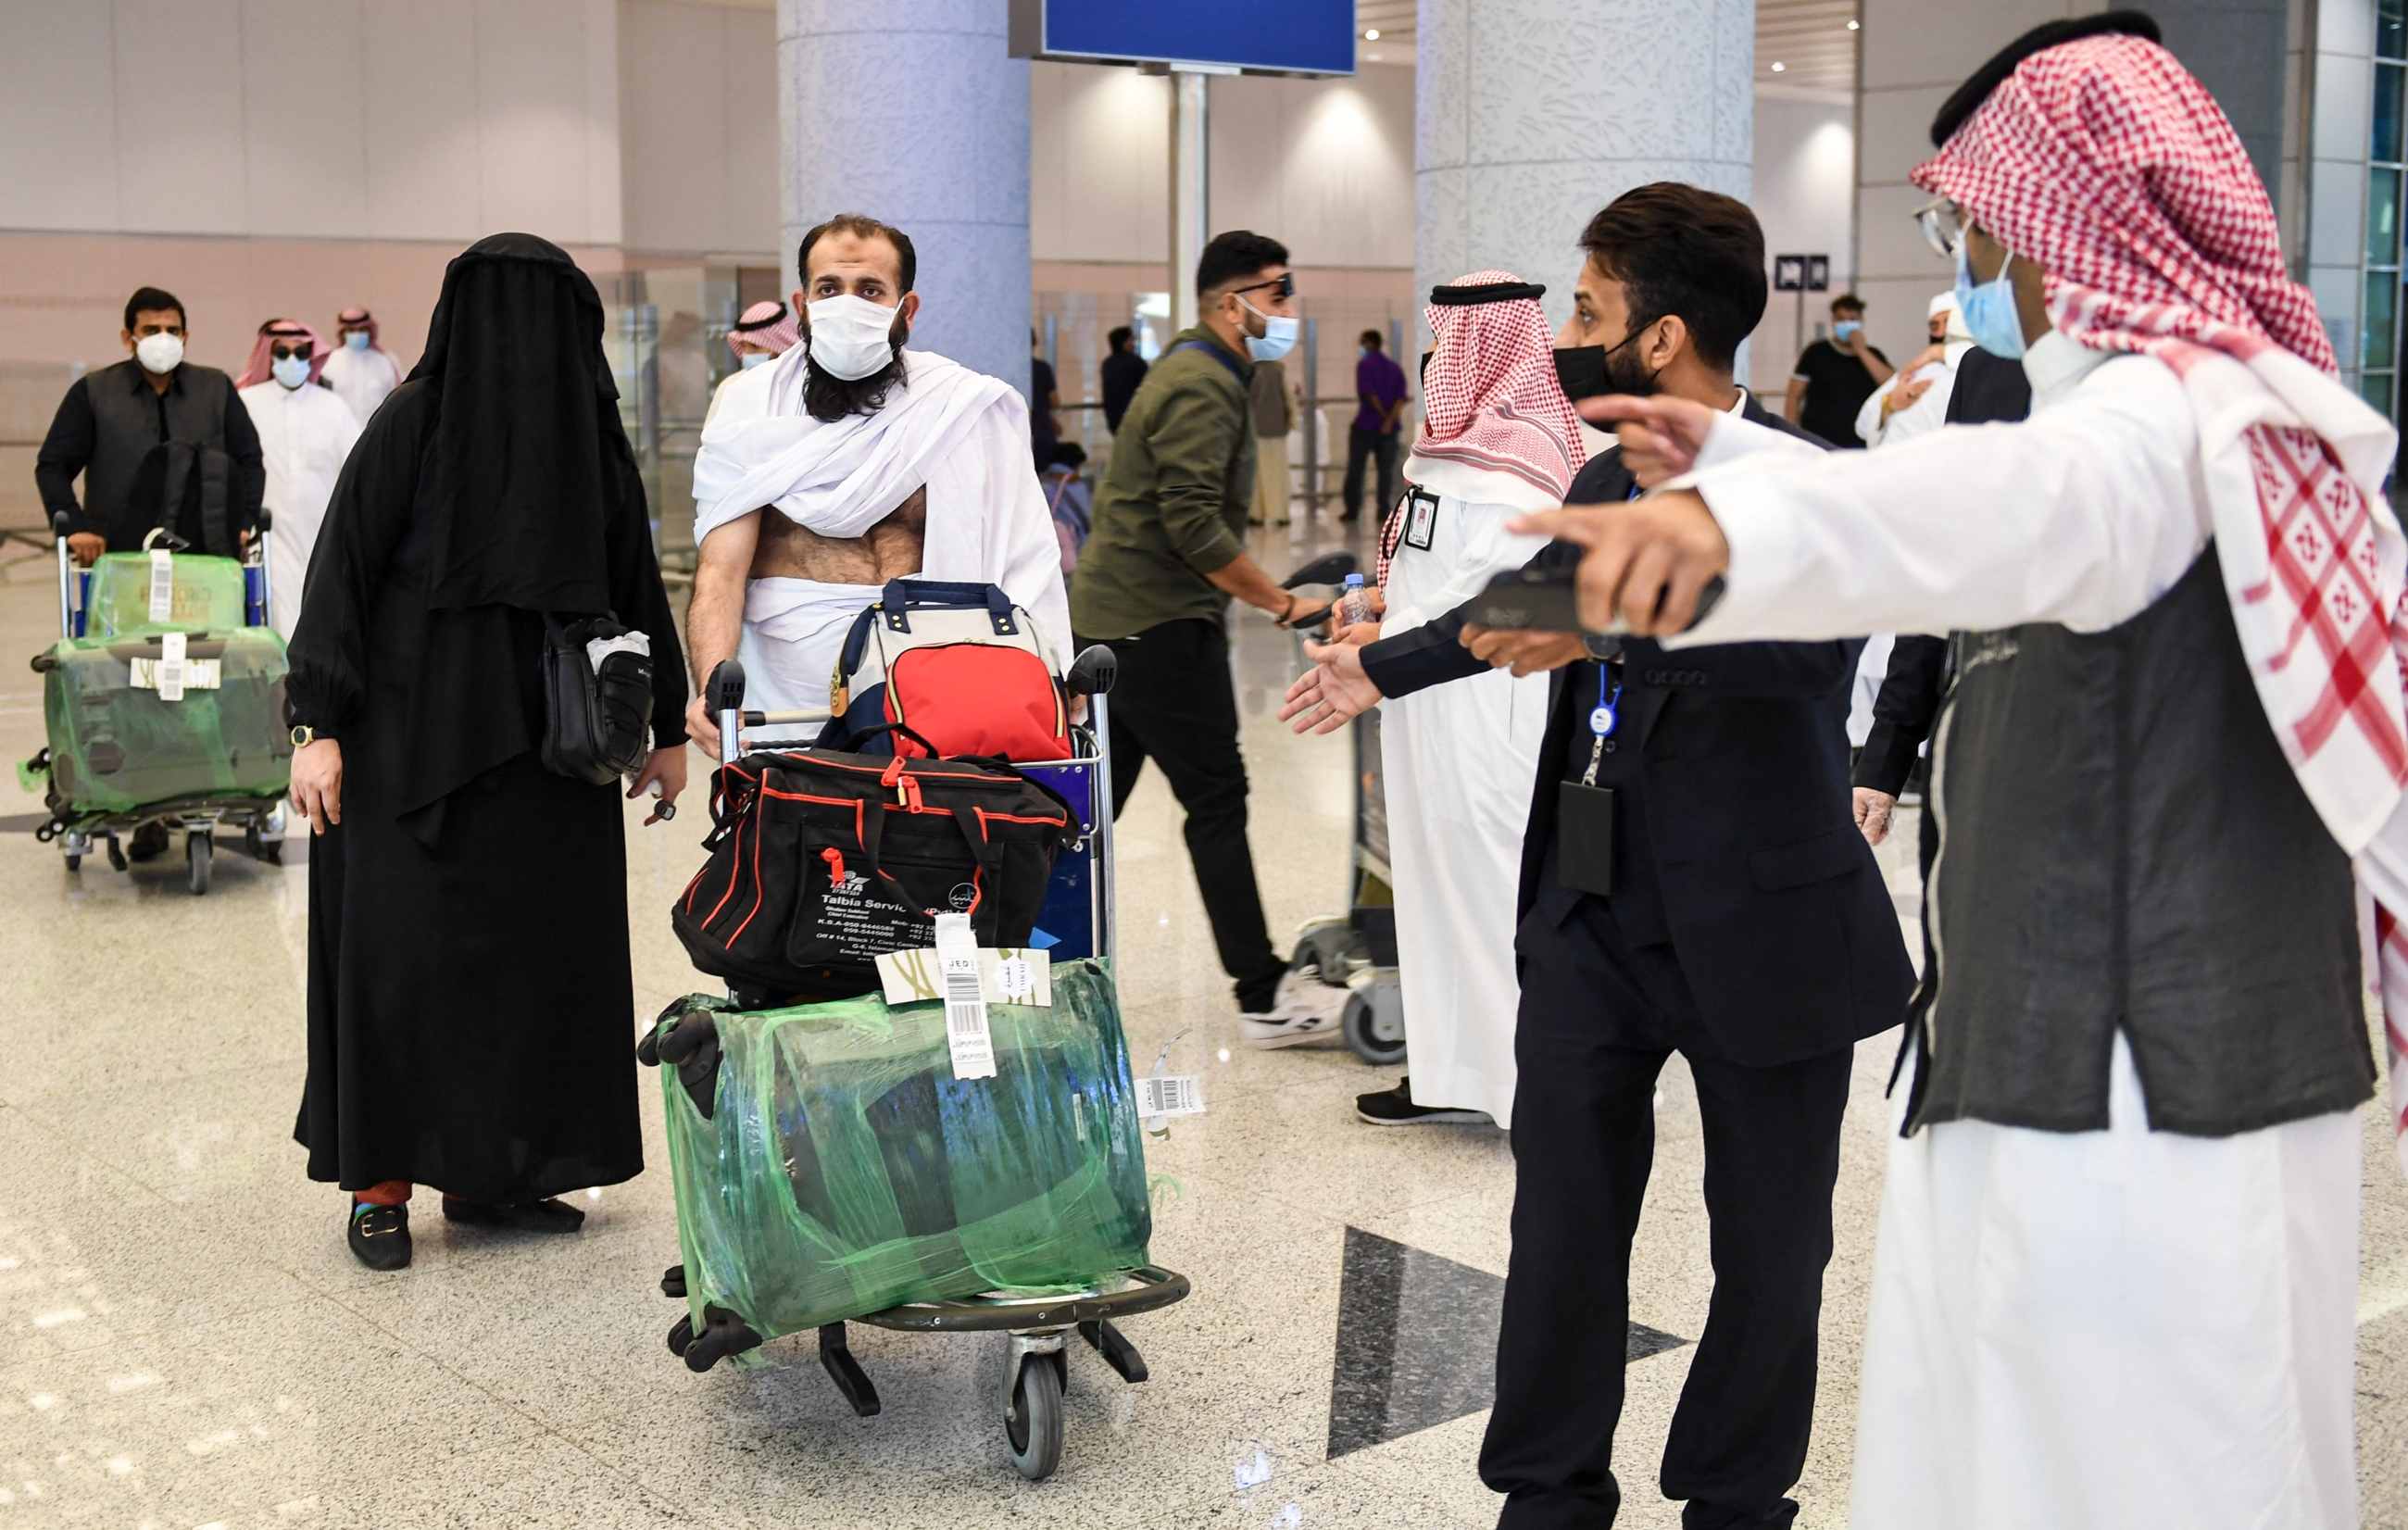 Nearly two million people had performed Umrah since it had reopened last October when restrictions were eased.